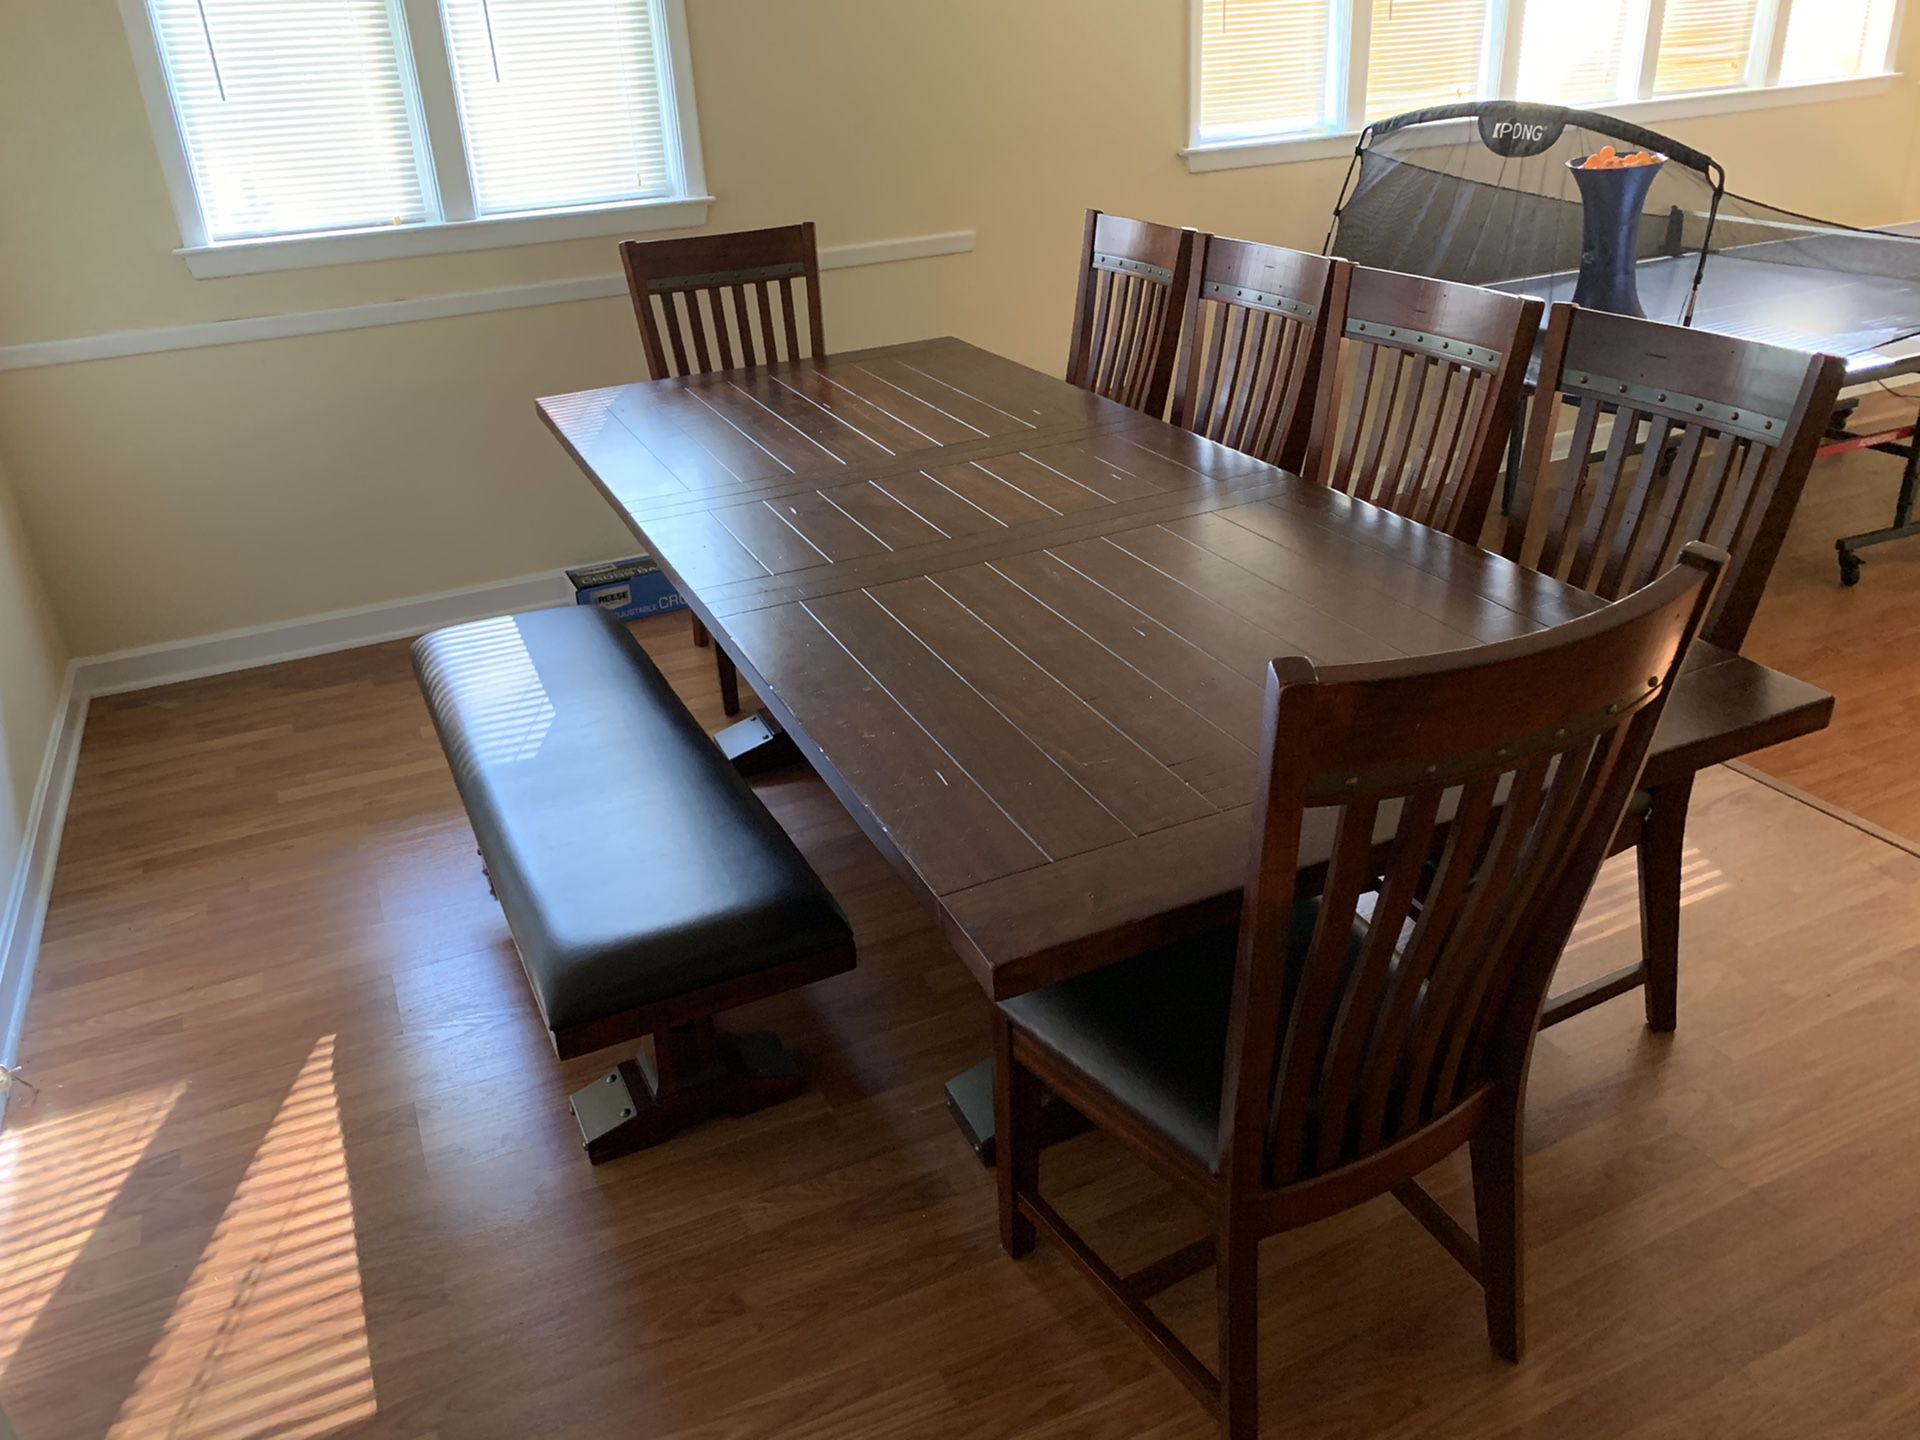 Hayden Rectangular Trestle Table Dining Room Set Model # HY-TA-42100-RSE-R-SET. Includes 6 Slat Back Chairs and Matching Bench